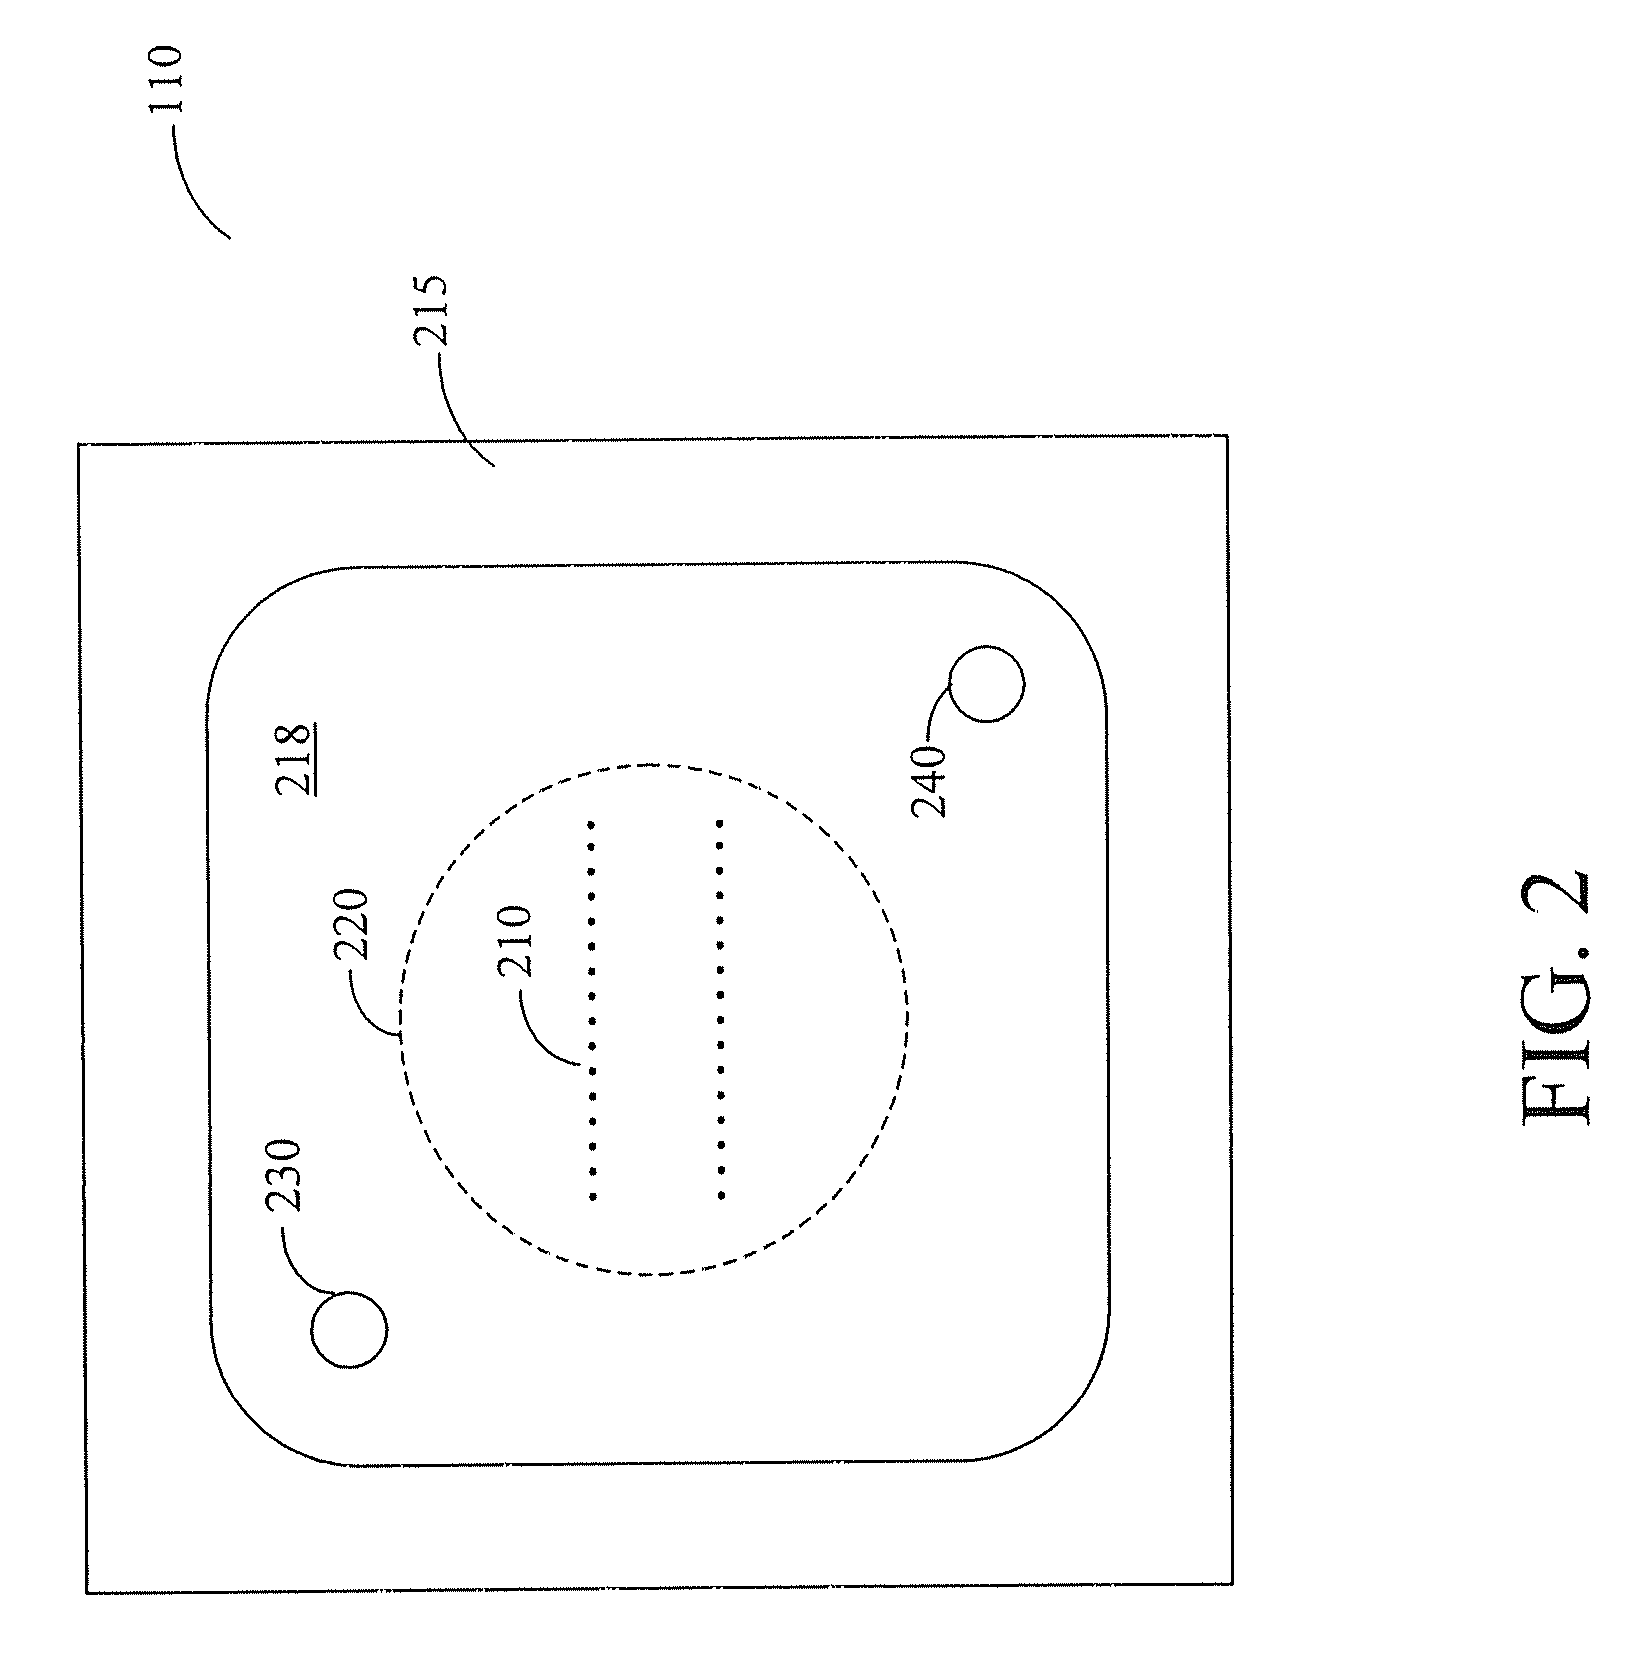 Method and System for Phase-Locked Sequencing